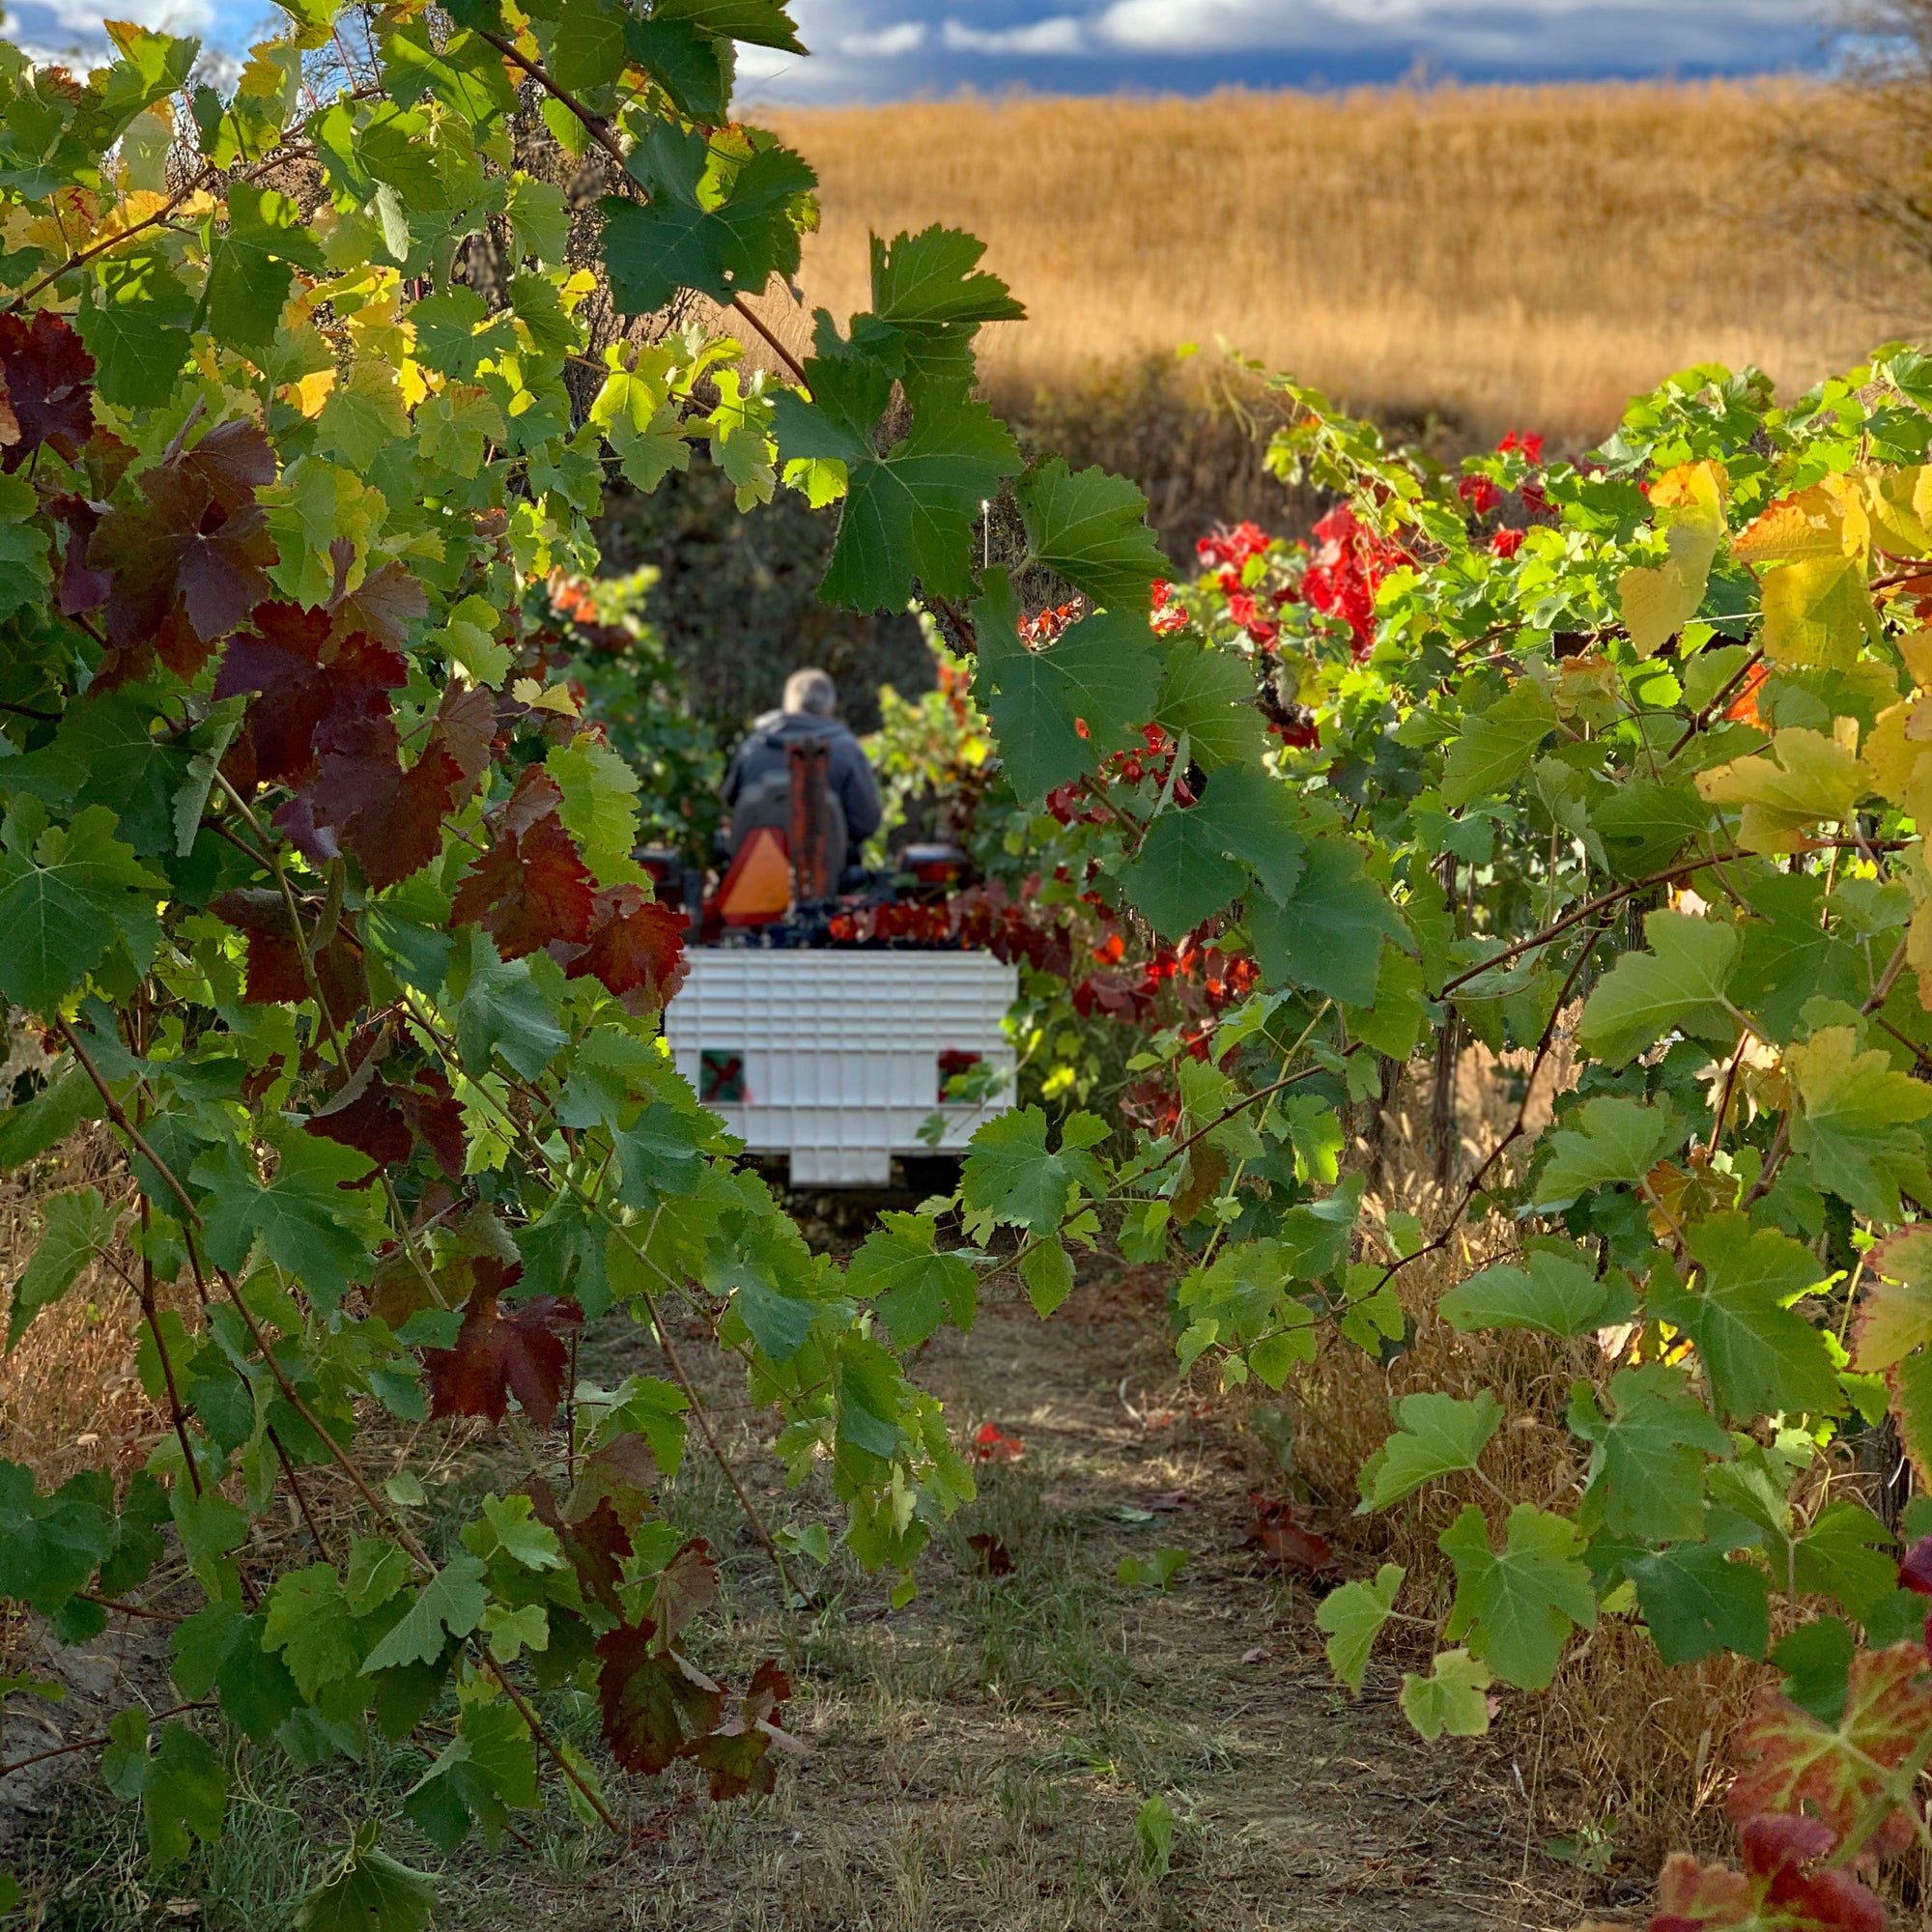 Harvest time in the vineyard with tractor and picking bin at Pentâge Winery